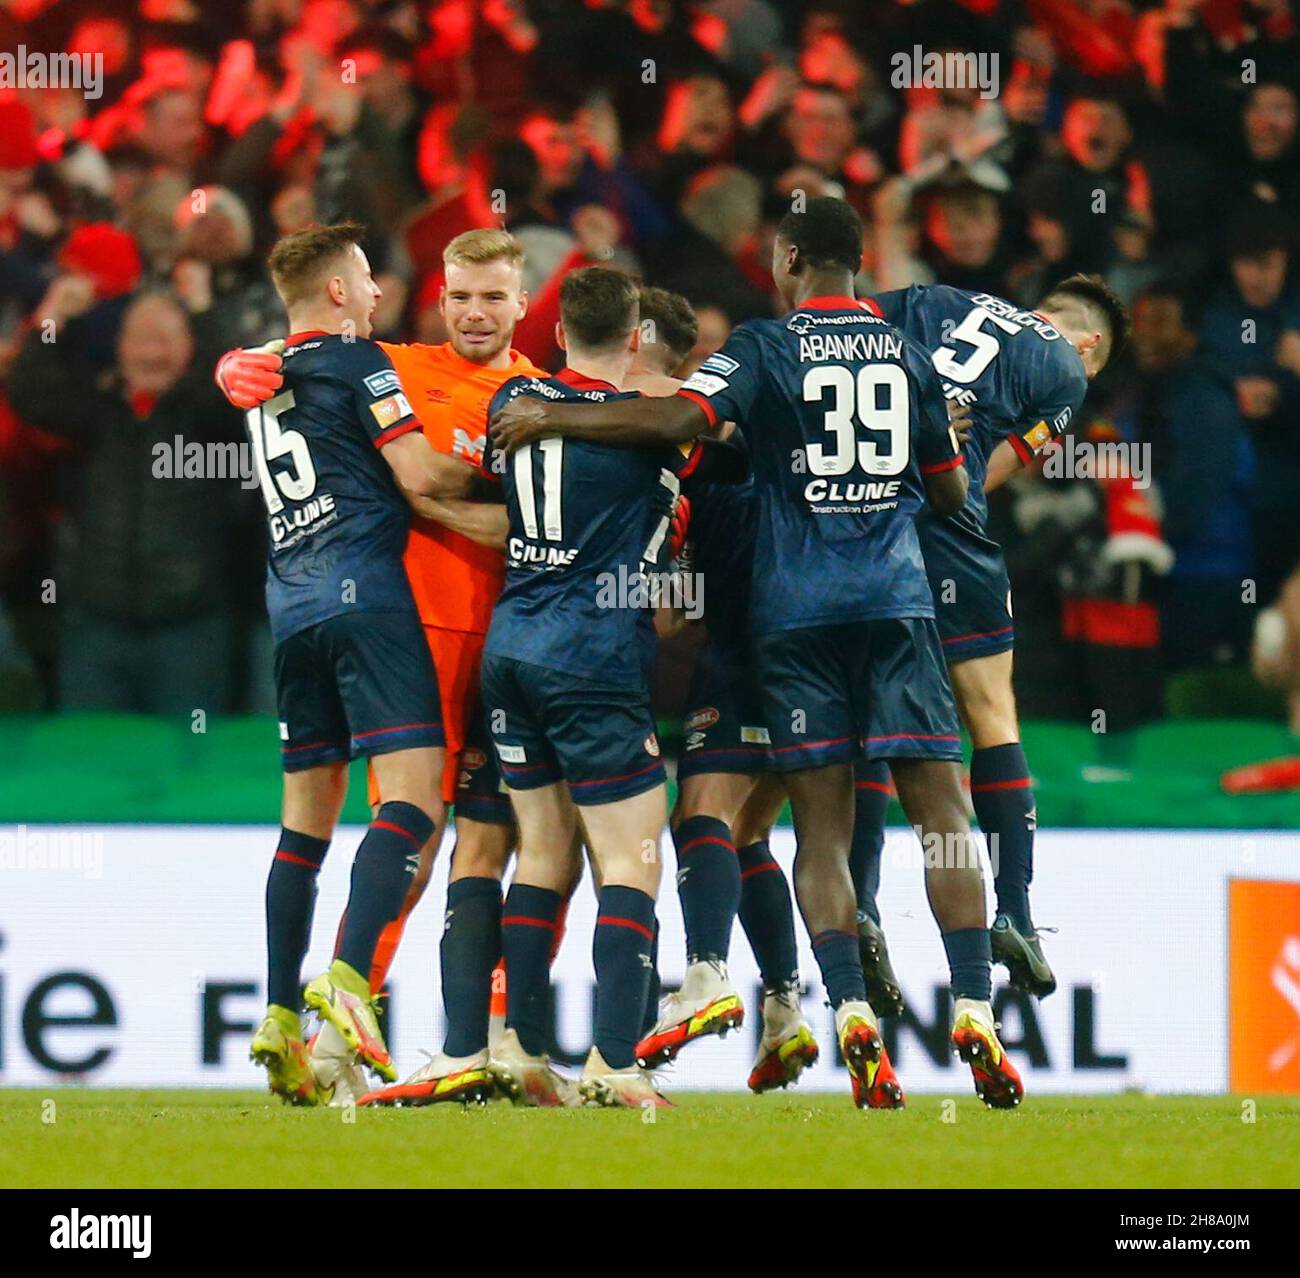 Aviva Stadium, Dublin, Ireland. 28th Nov, 2021. FAI Football Cup Final;  Bohemians versus St Patricks Athletic FC; St. Patrick's Athletic players  celebrate winning the FAI Cup Final after a penalty shoot out